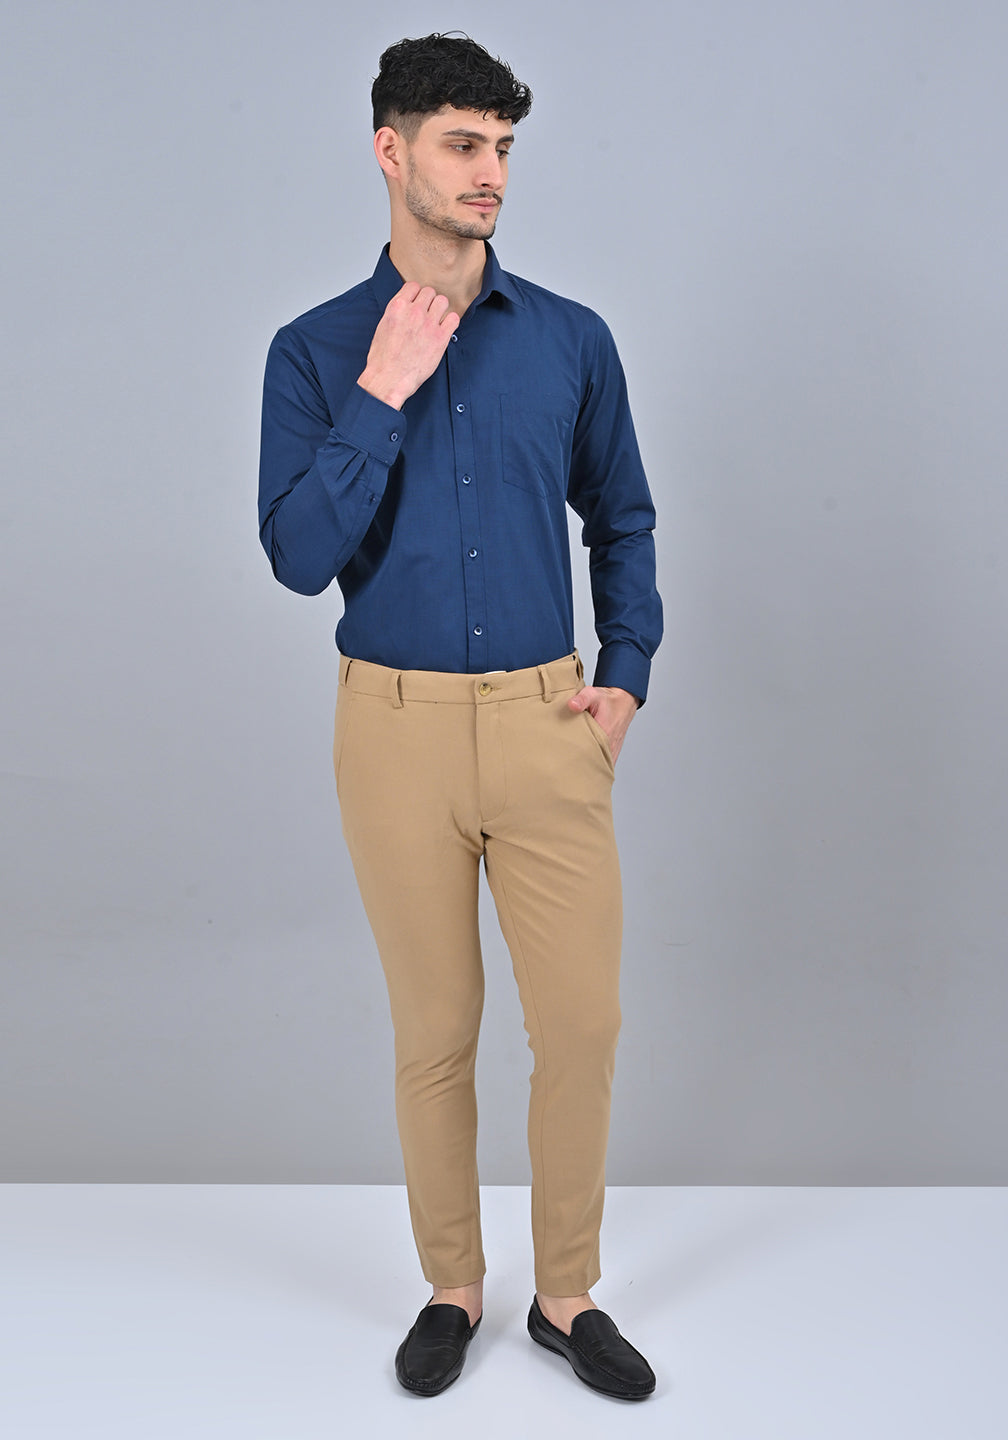 Navy Blue Colour Solid Formal Full Sleeve Shirt